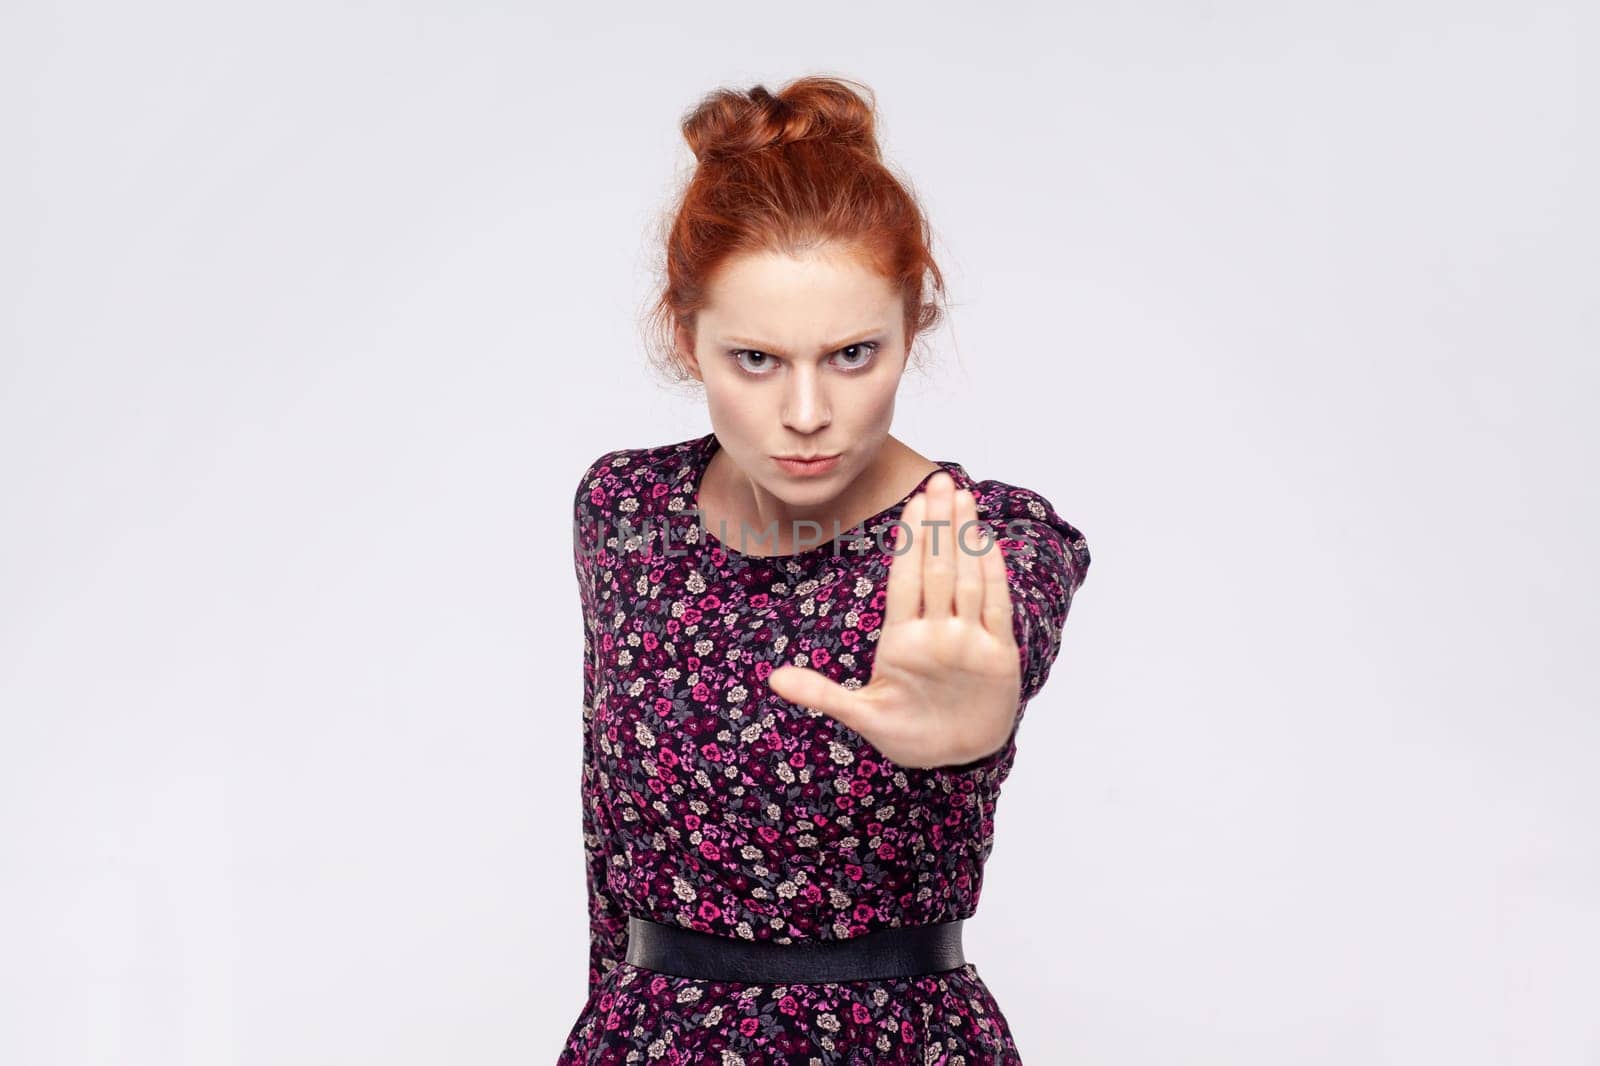 Annoyed ginger woman wearing dress making stop gesture with her palm outward, saying no, expressing denial or restriction, negative human emotions. Indoor studio shot isolated on gray background.